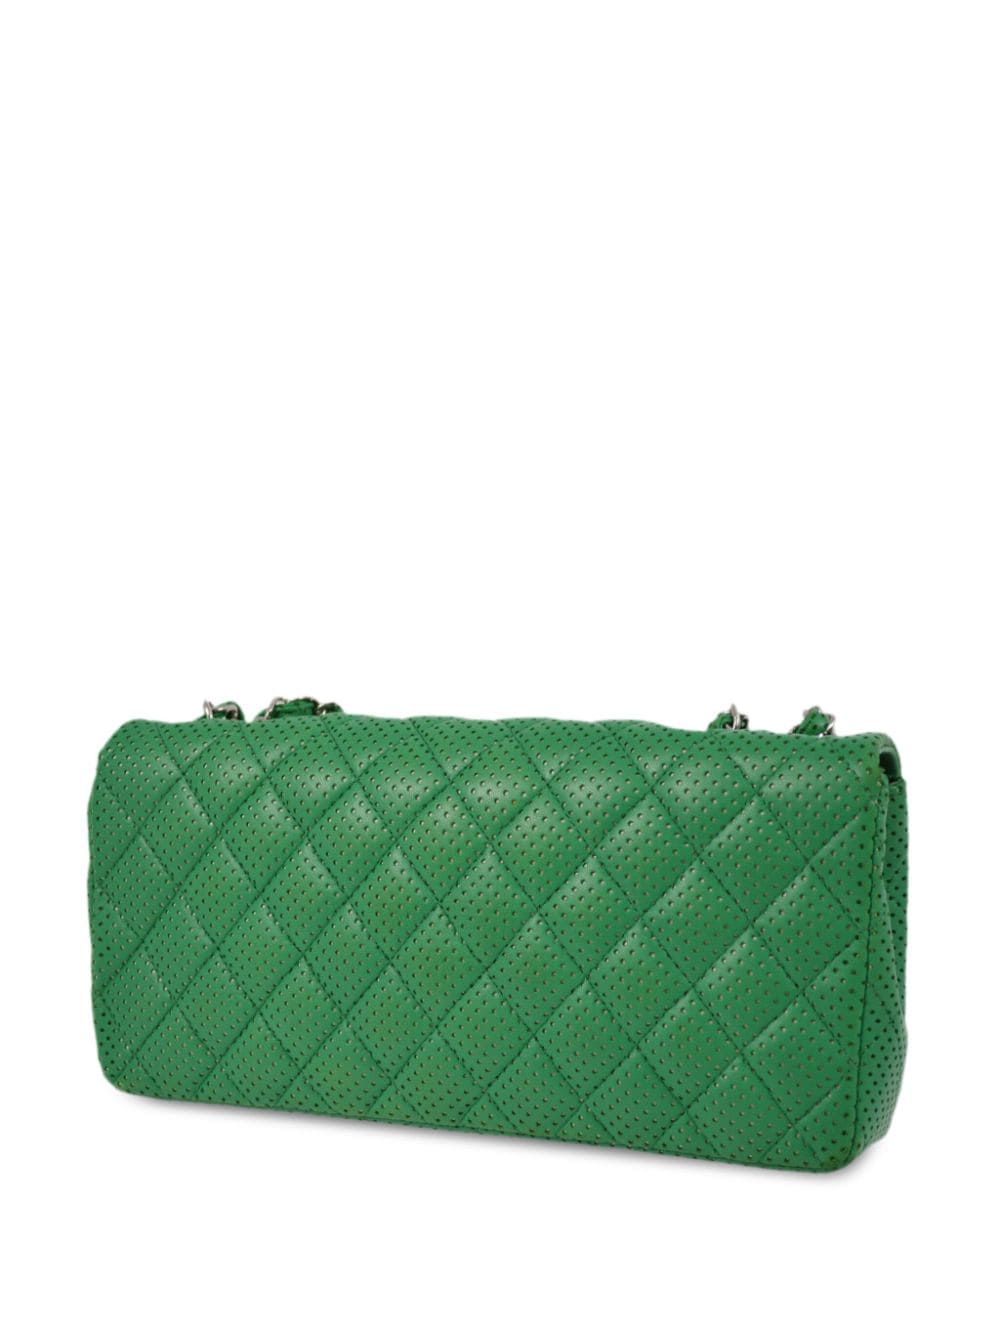 Pre-owned Chanel East West 单肩包（2007年典藏款） In Green